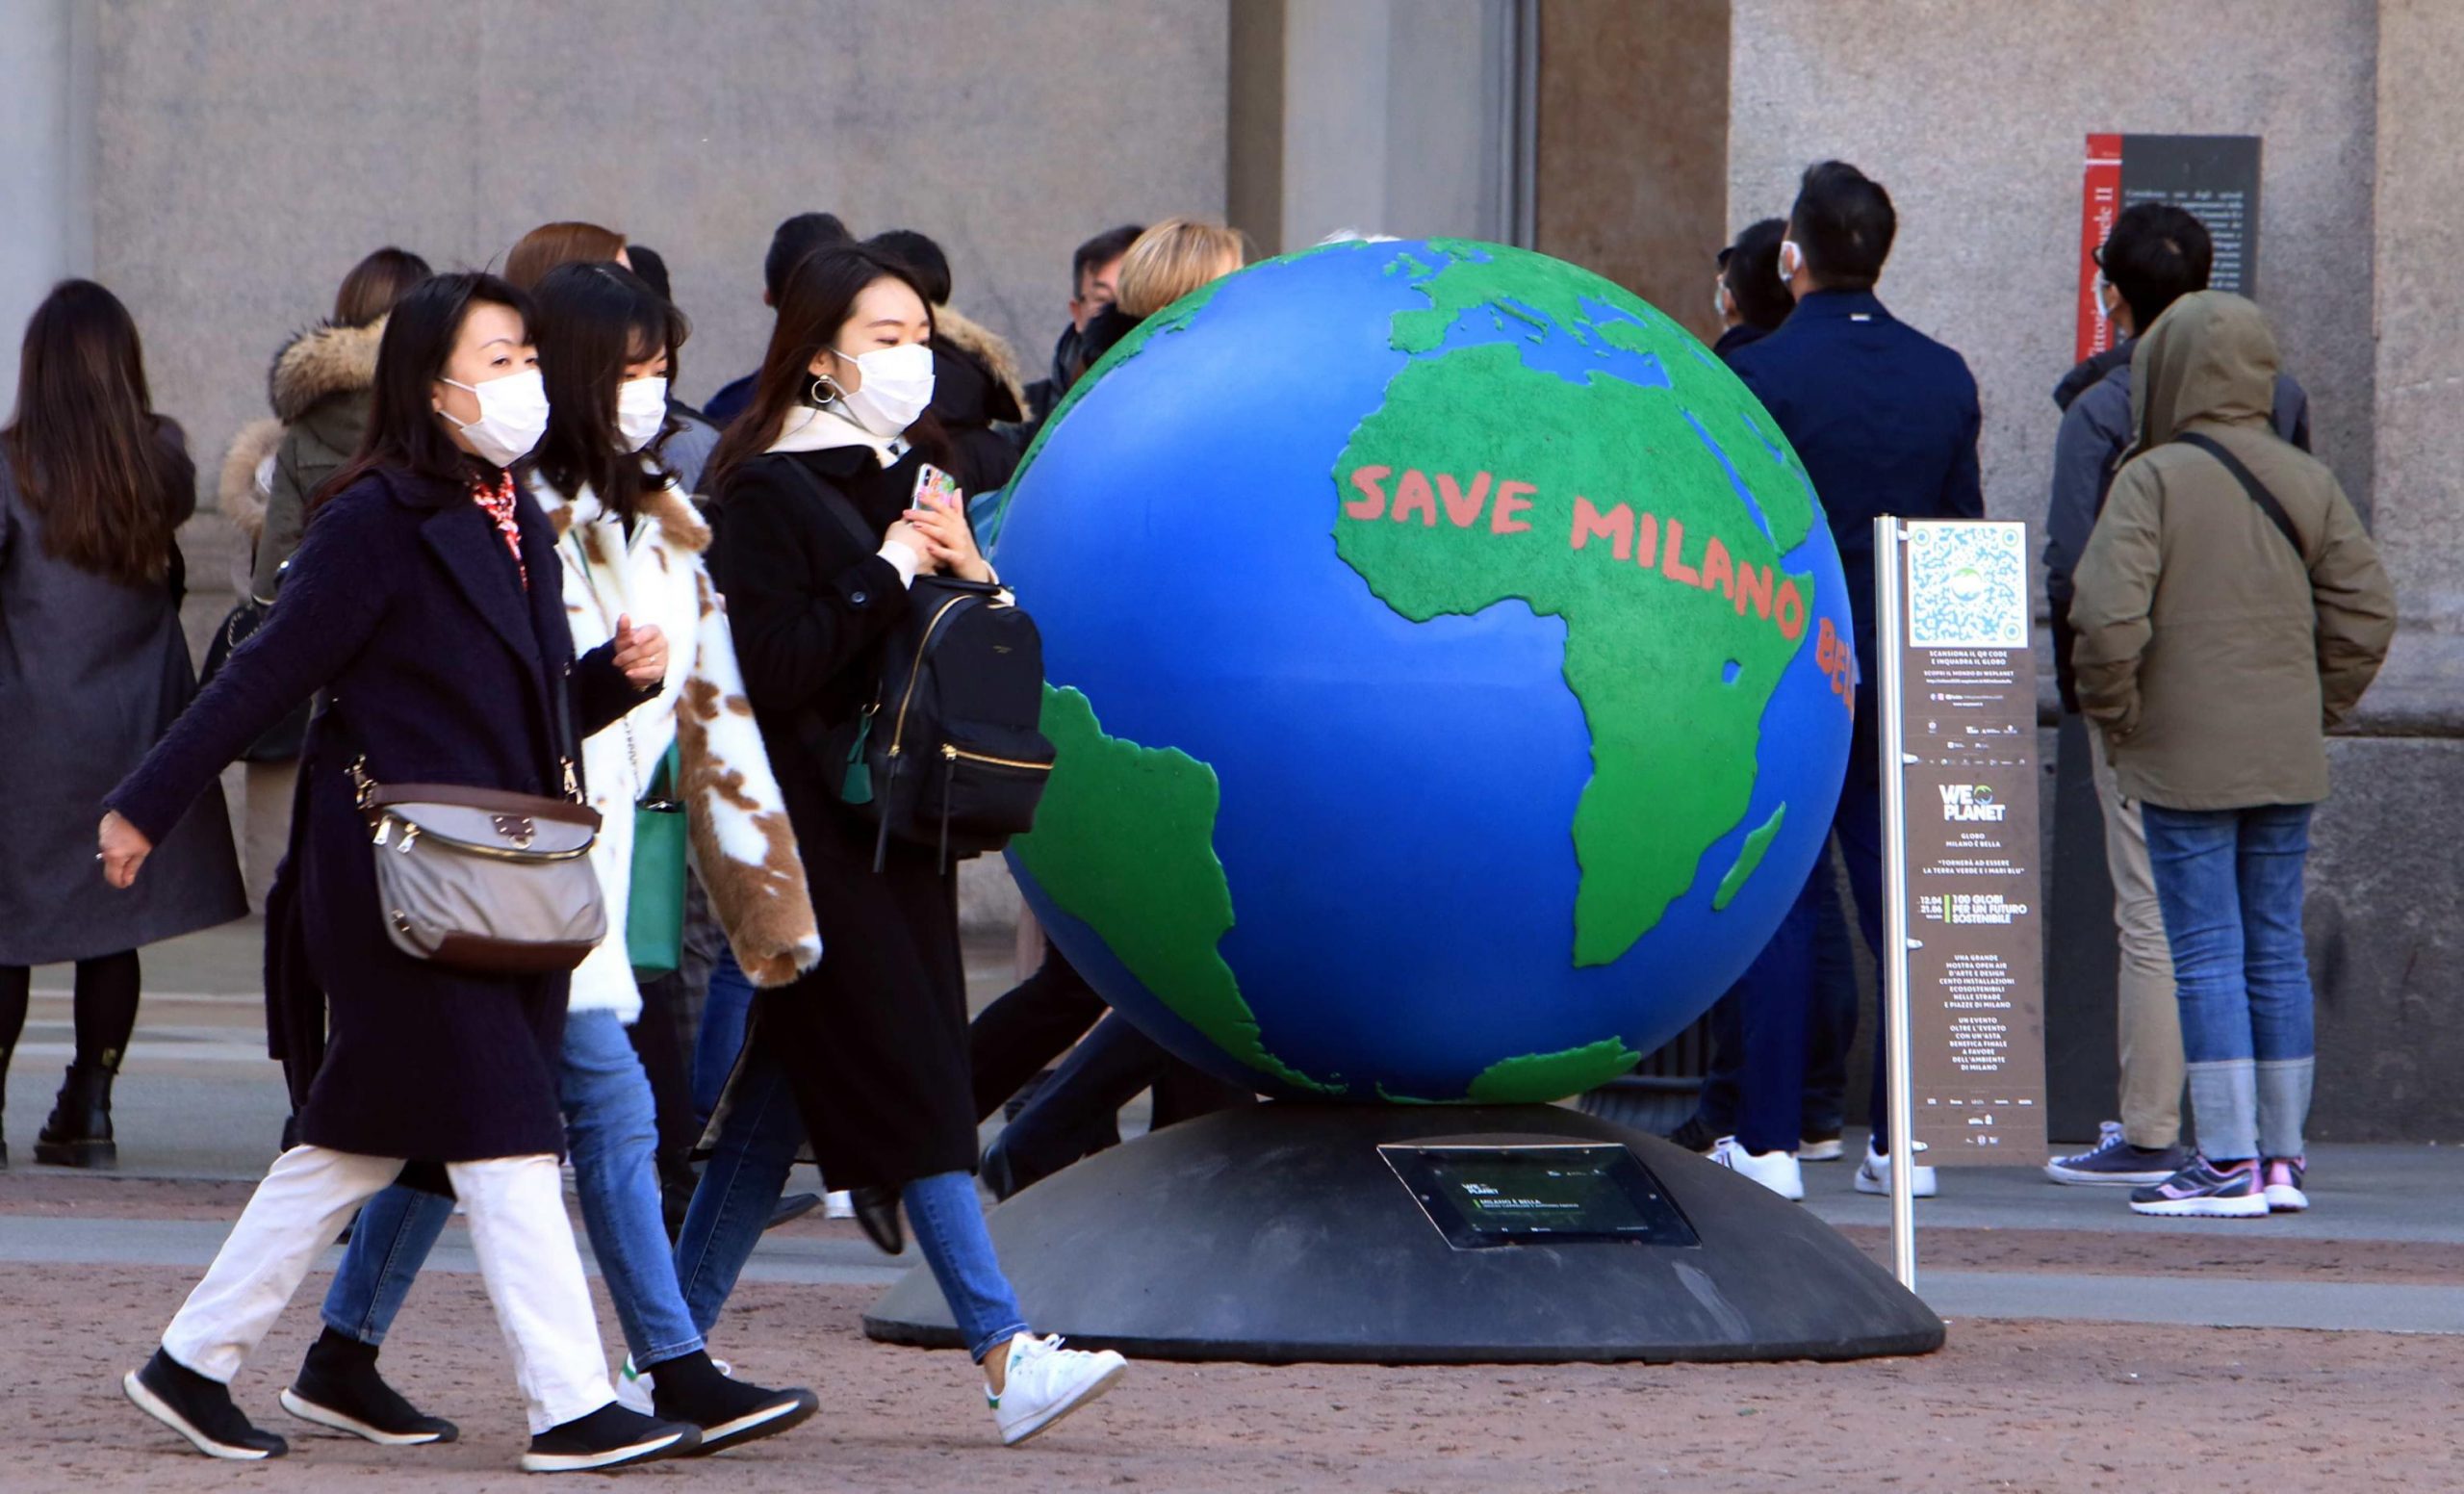 epa08253076 Asian tourists wearing protective mask walk next the istallation 'We planet', a part of hundred globes scattered around the city center made by artists asking for a sustainable future, Milan, Italy, 27 February 2020. Officials say that the number of people which have died due to the COVID-19 coronavirus in Italy has climbed to 12 while more than 400 persons have contracted the virus.  EPA/Paolo Salmoirago